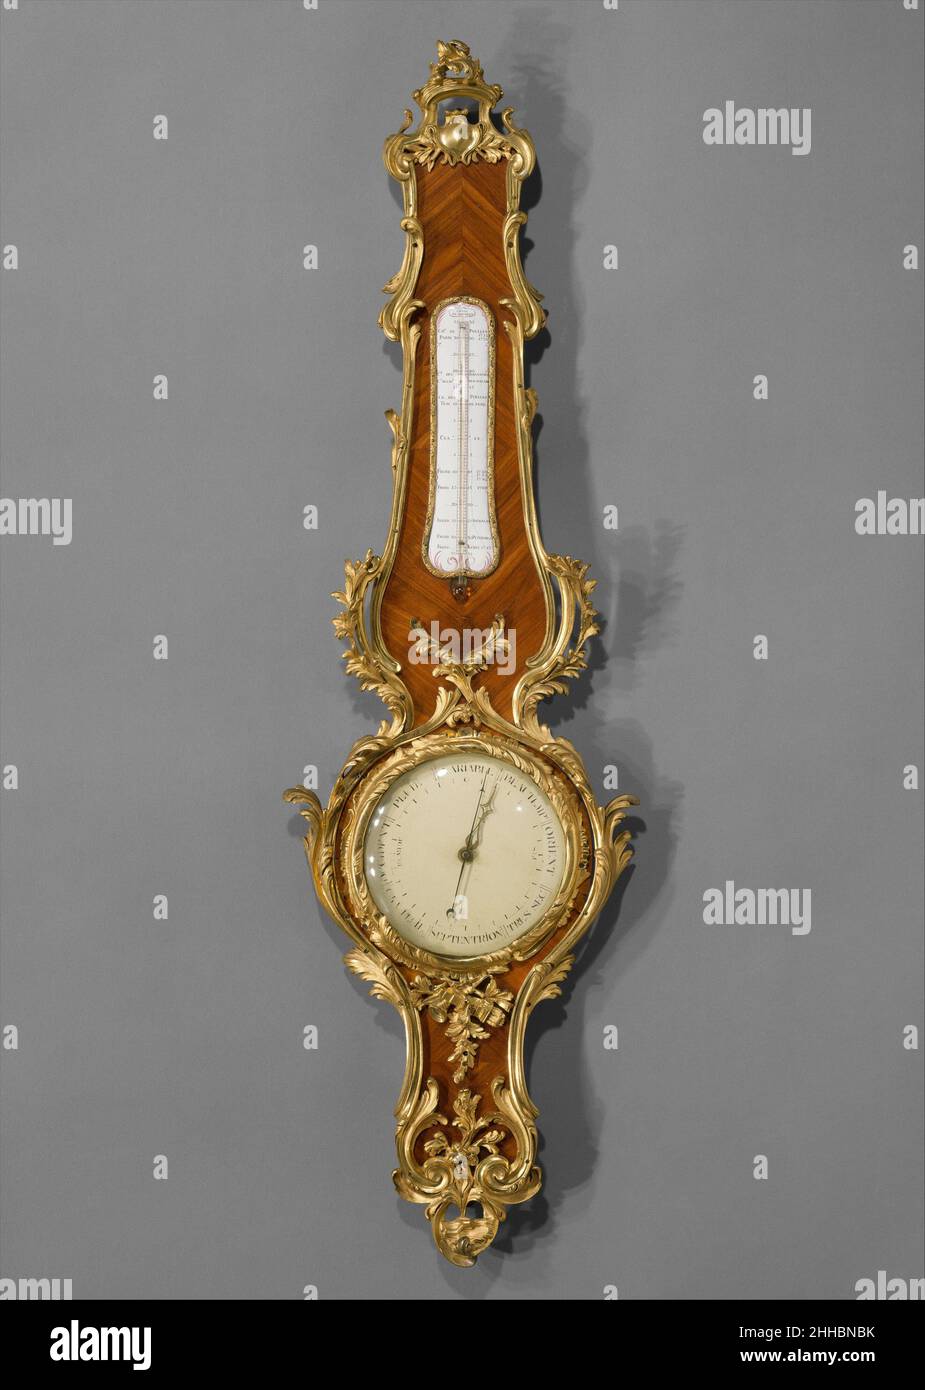 Thermometer, Barometer and Wall Clock by F. Berthoud, Paris, Louis